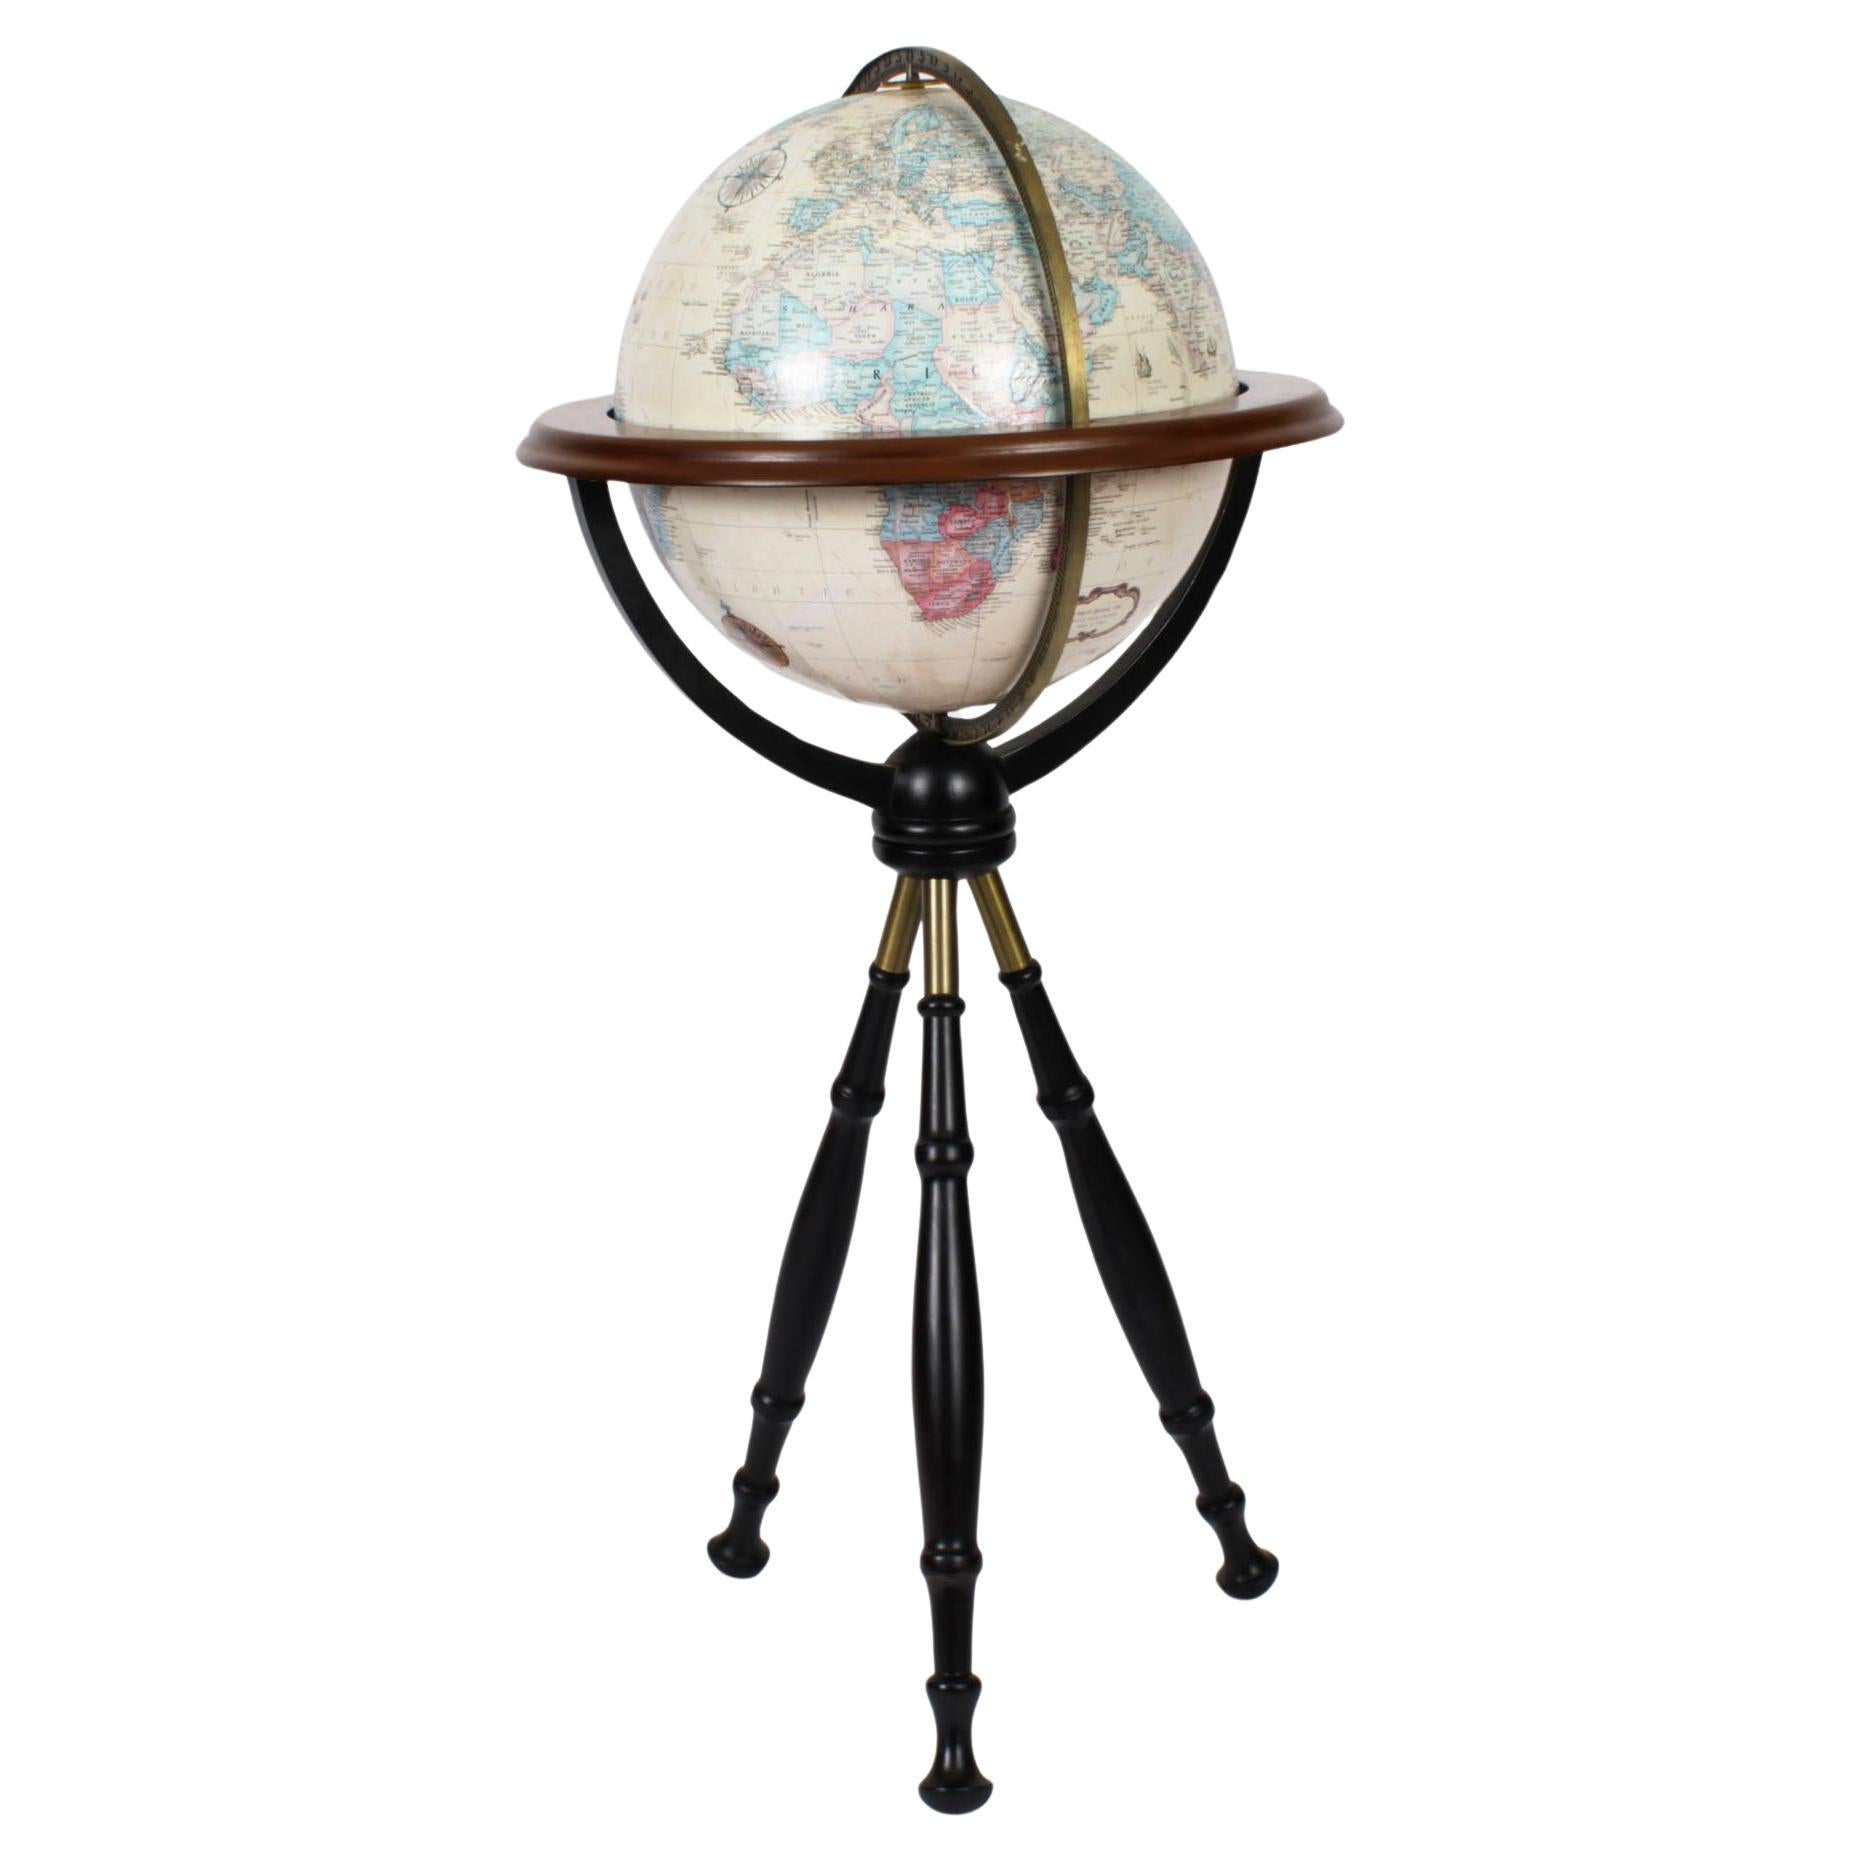 Vintage Terrestrial Library Globe on Stand 20th Century